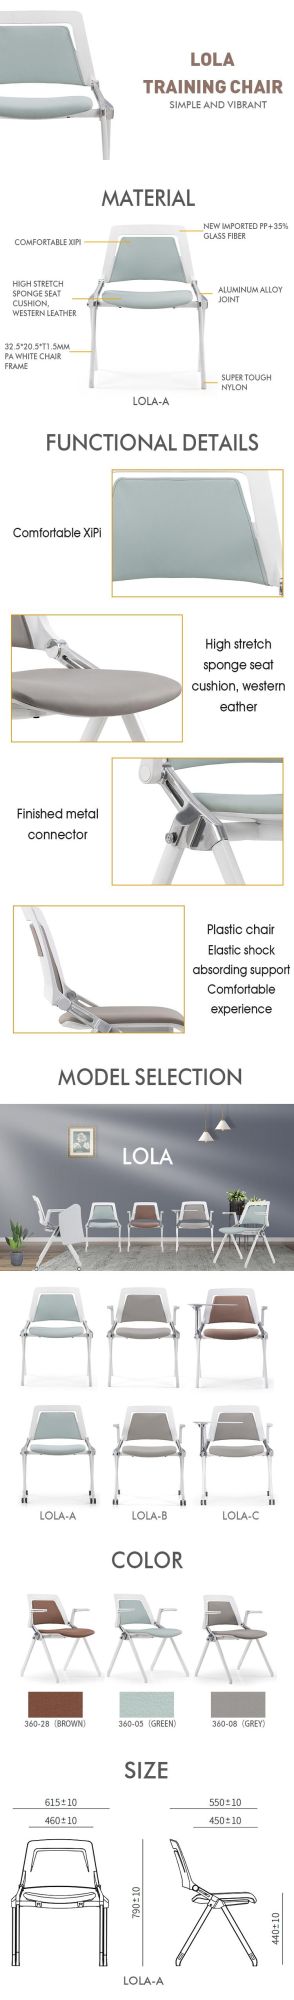 Plastic Link-Able School Training Chair with Aluminum Alloy Connection and Soft PU Cover